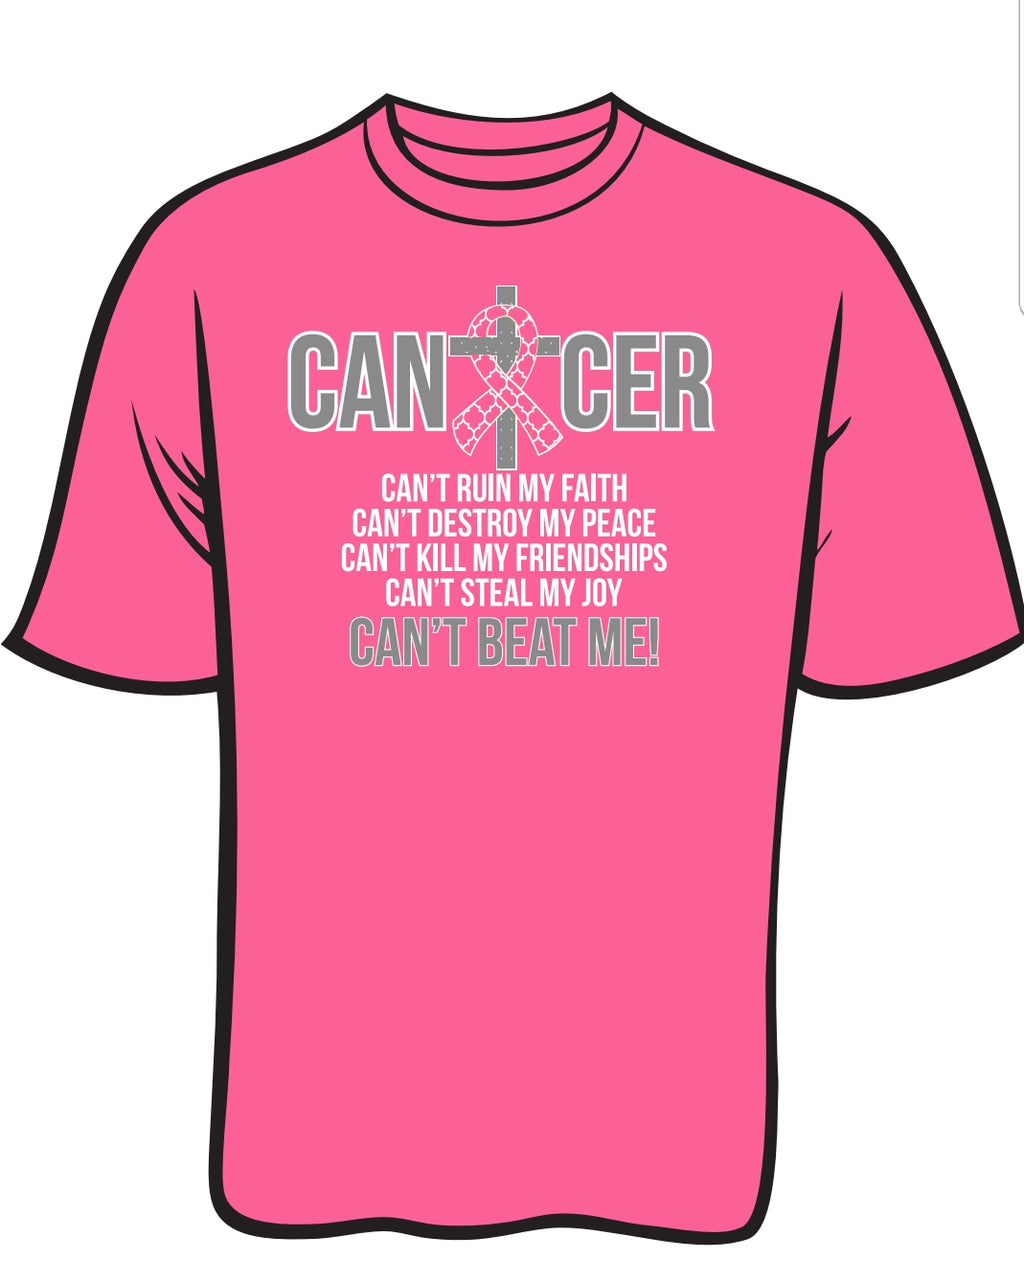 Cancer Can't Tee